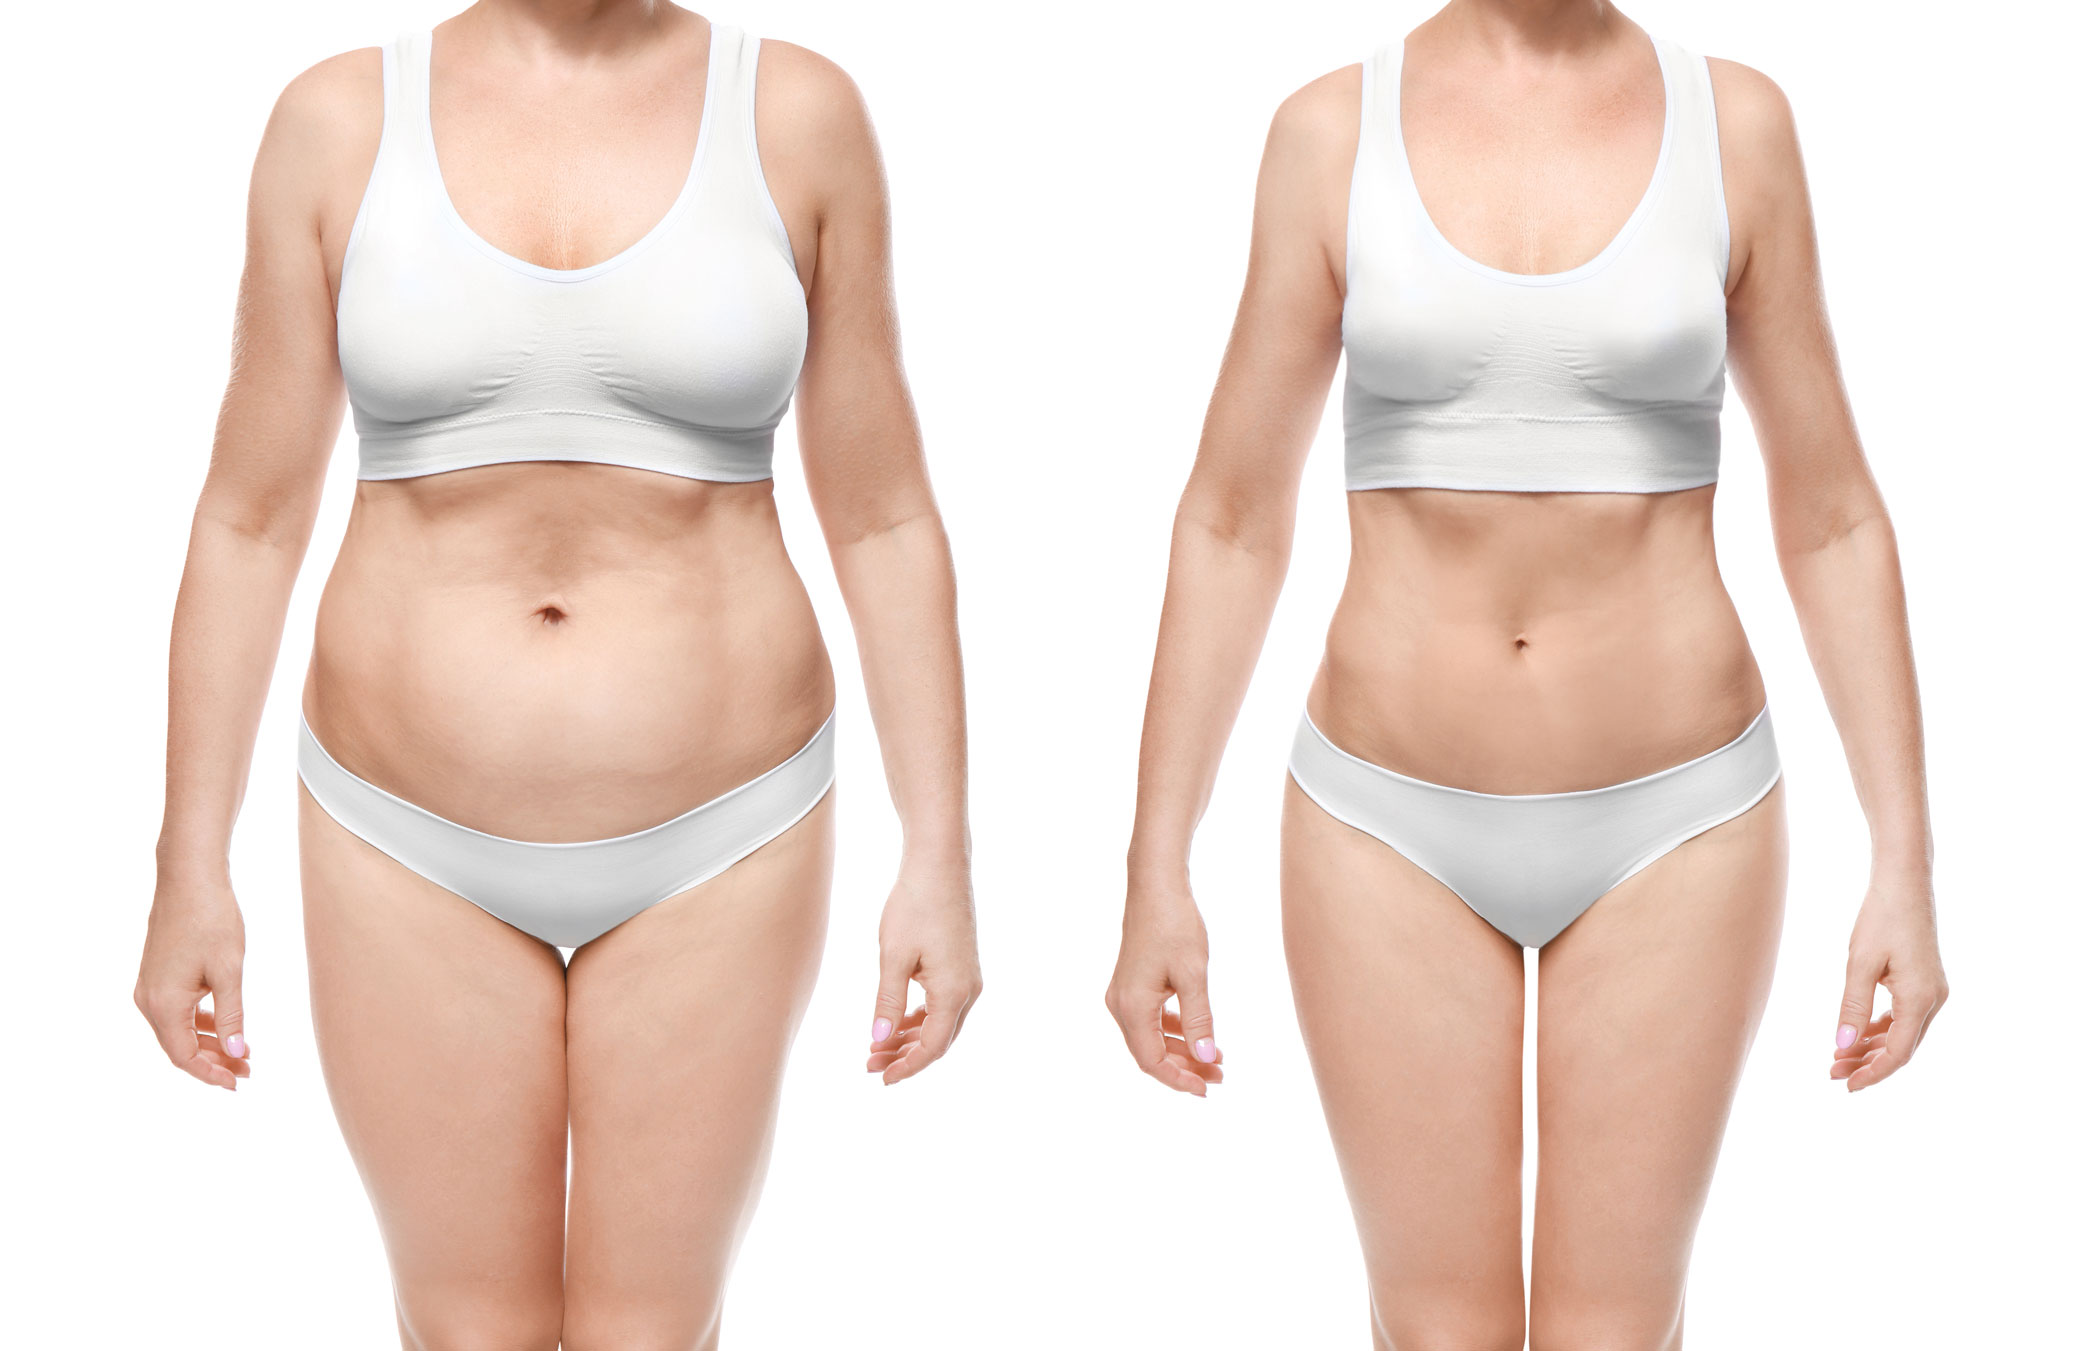 Reshaping and Refining Your Body with Liposuction